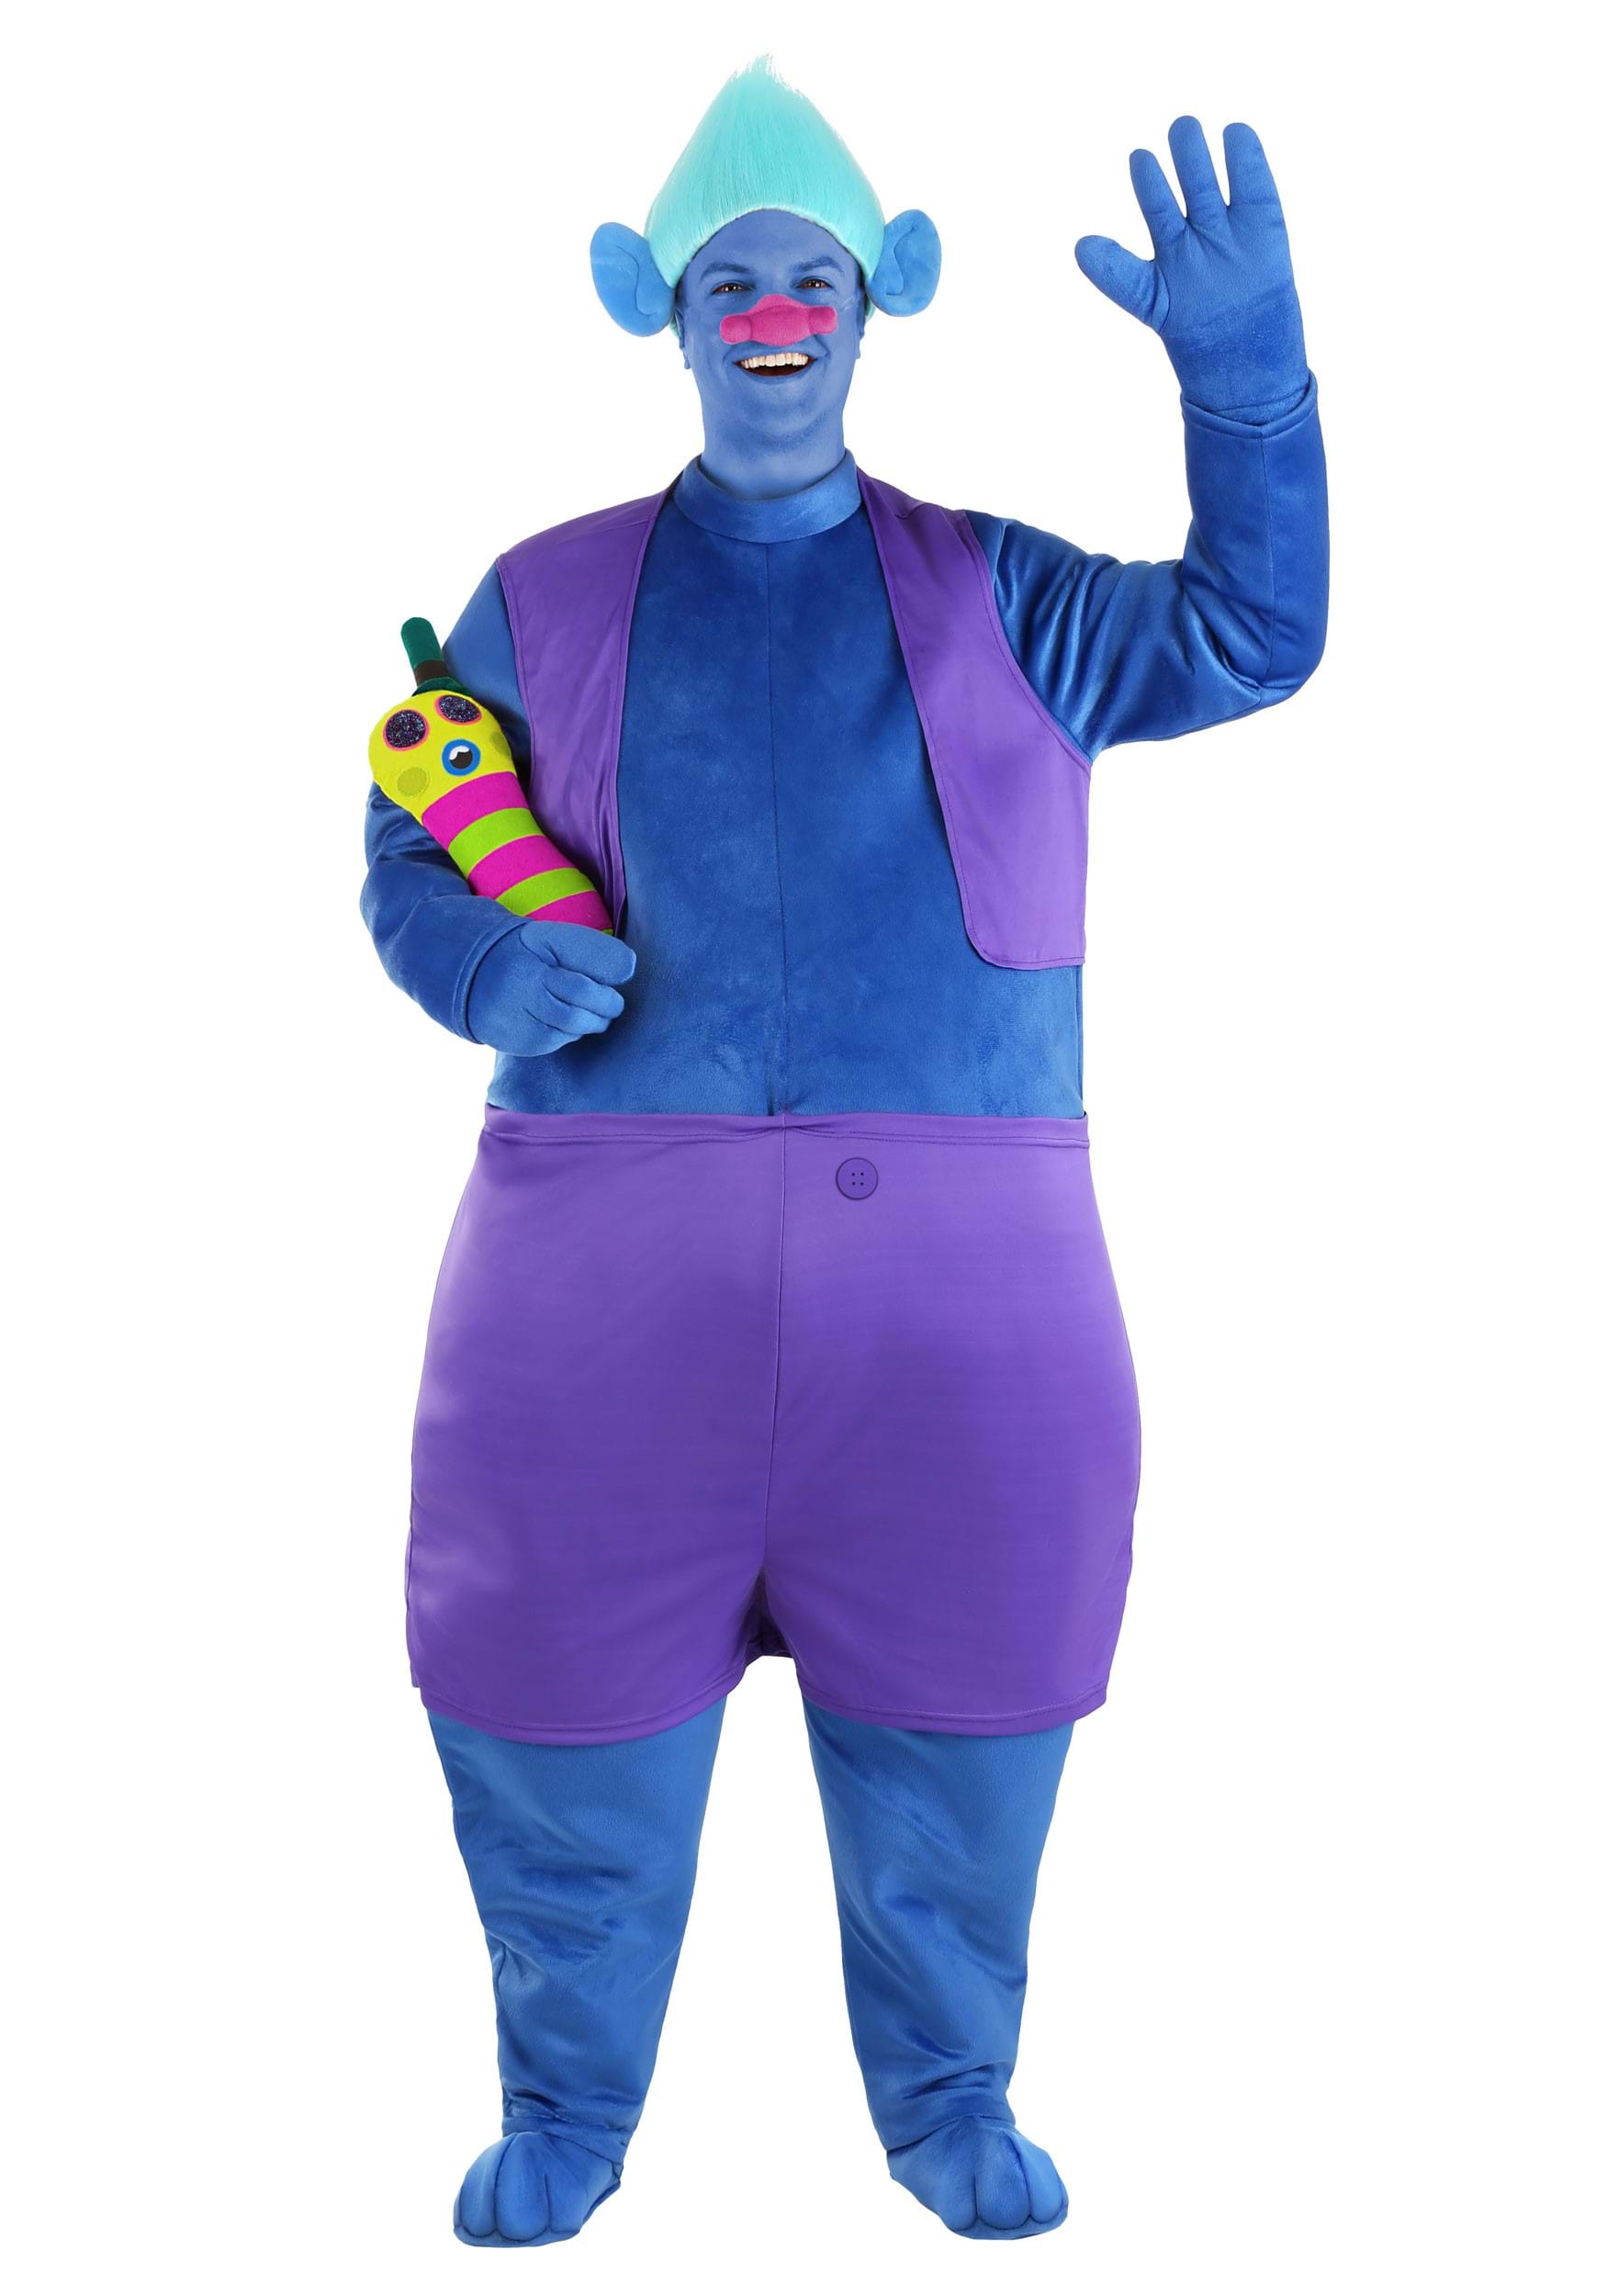 Image of Plus Size Biggie Costume from Trolls for Adults ID FUN1523PL-2X